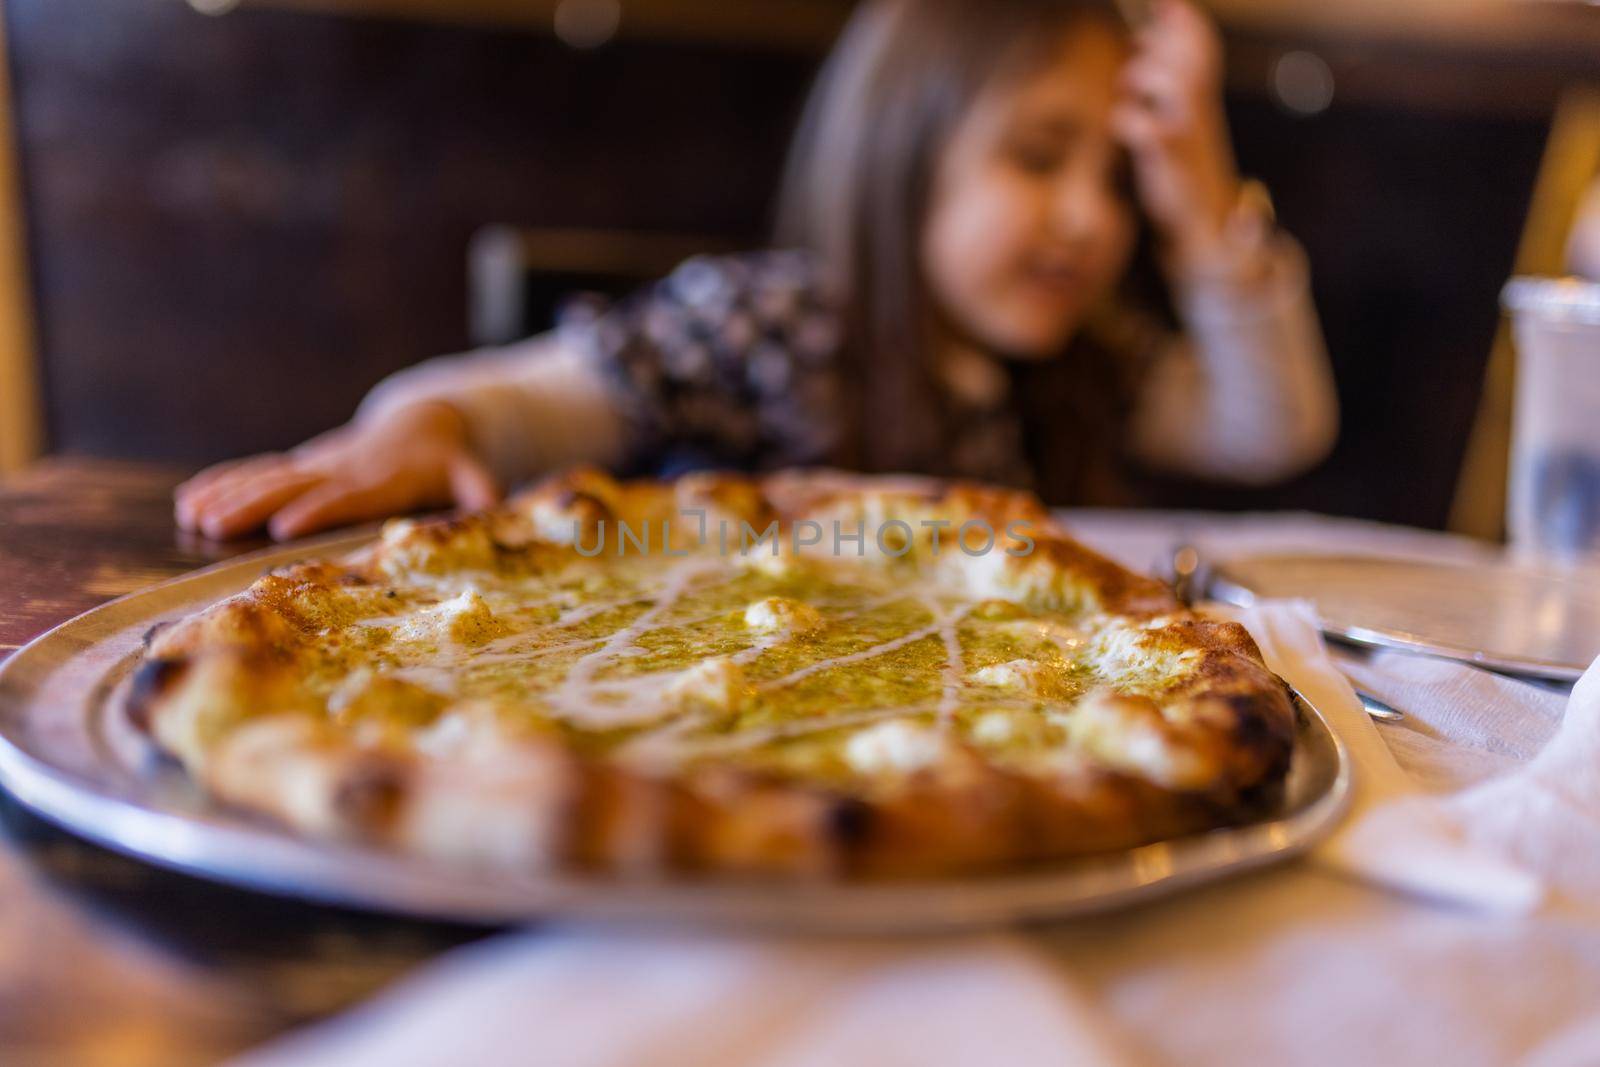 Tasty cheese and species pizza on vintage-looking wooden table with blurry little girl as background. Young child at rustic table ready to eat delicious Italian dish. Food and drinks